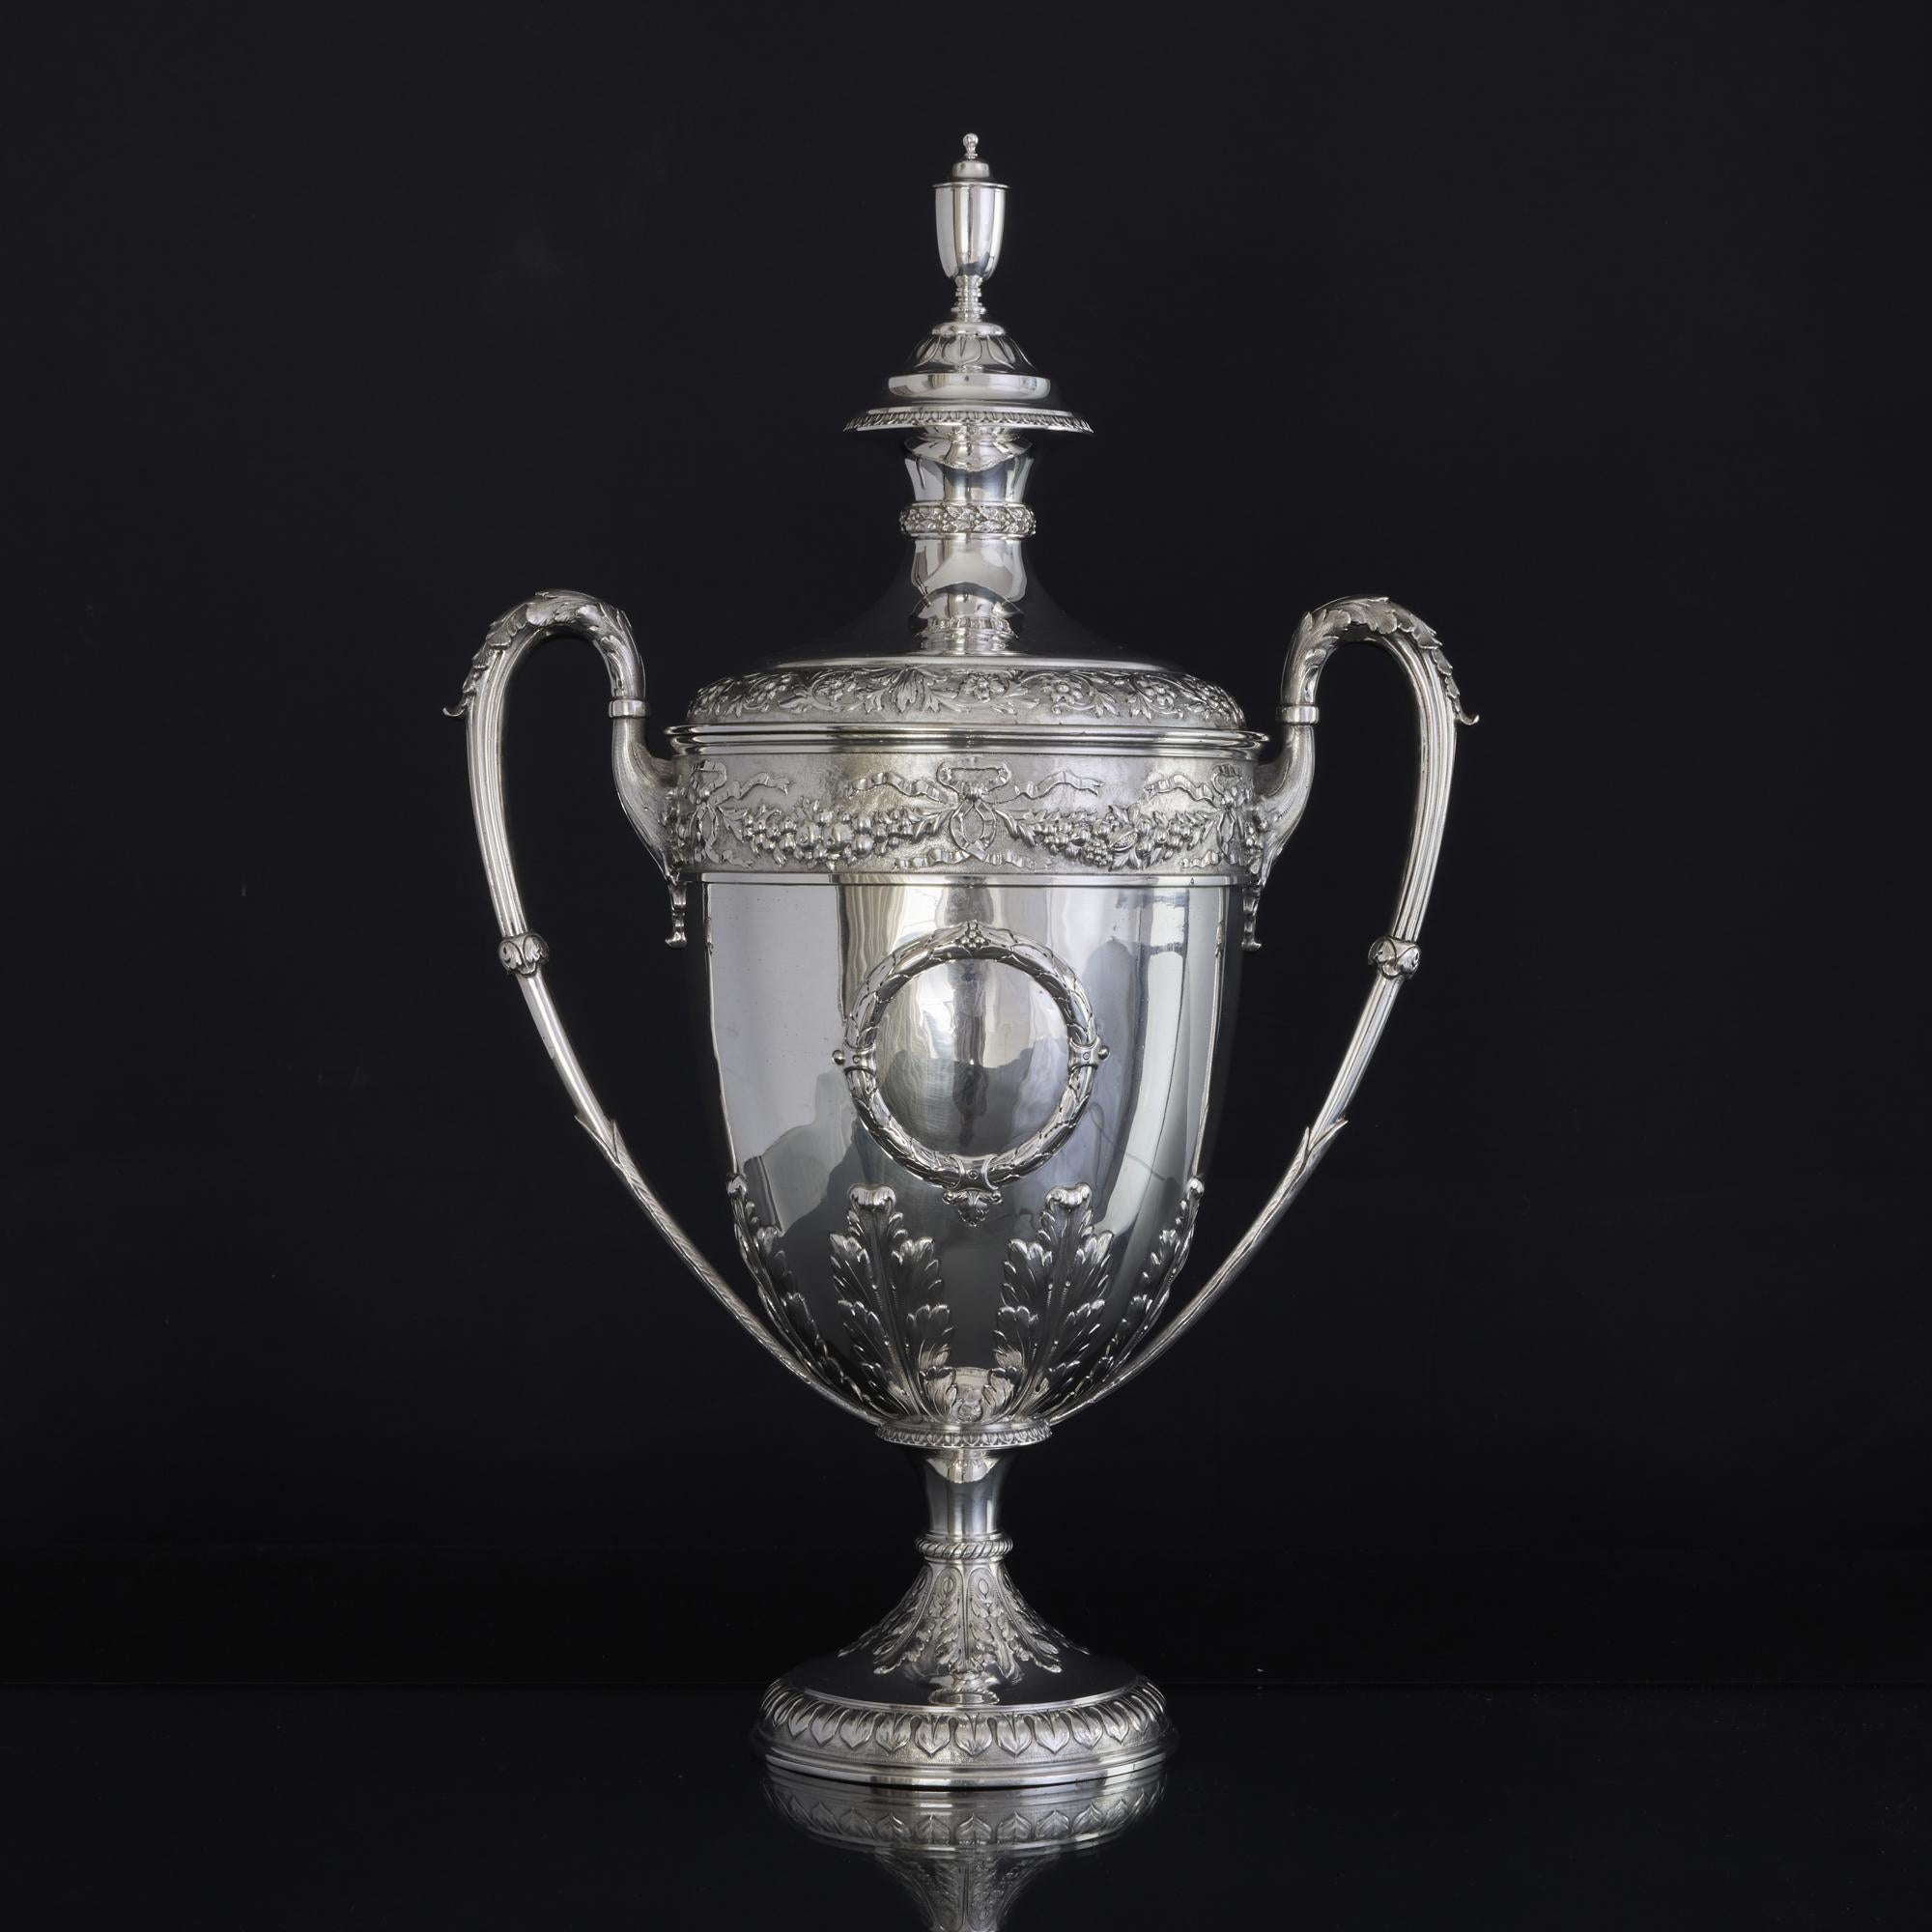 Impressive, large handmade silver trophy cup and cover decorated with raised hand chased sections of acanthus leaves, a panel of fruit and berry garlands with ribbon ties around the rim of the cup. The cover features a panel of swirling foliage